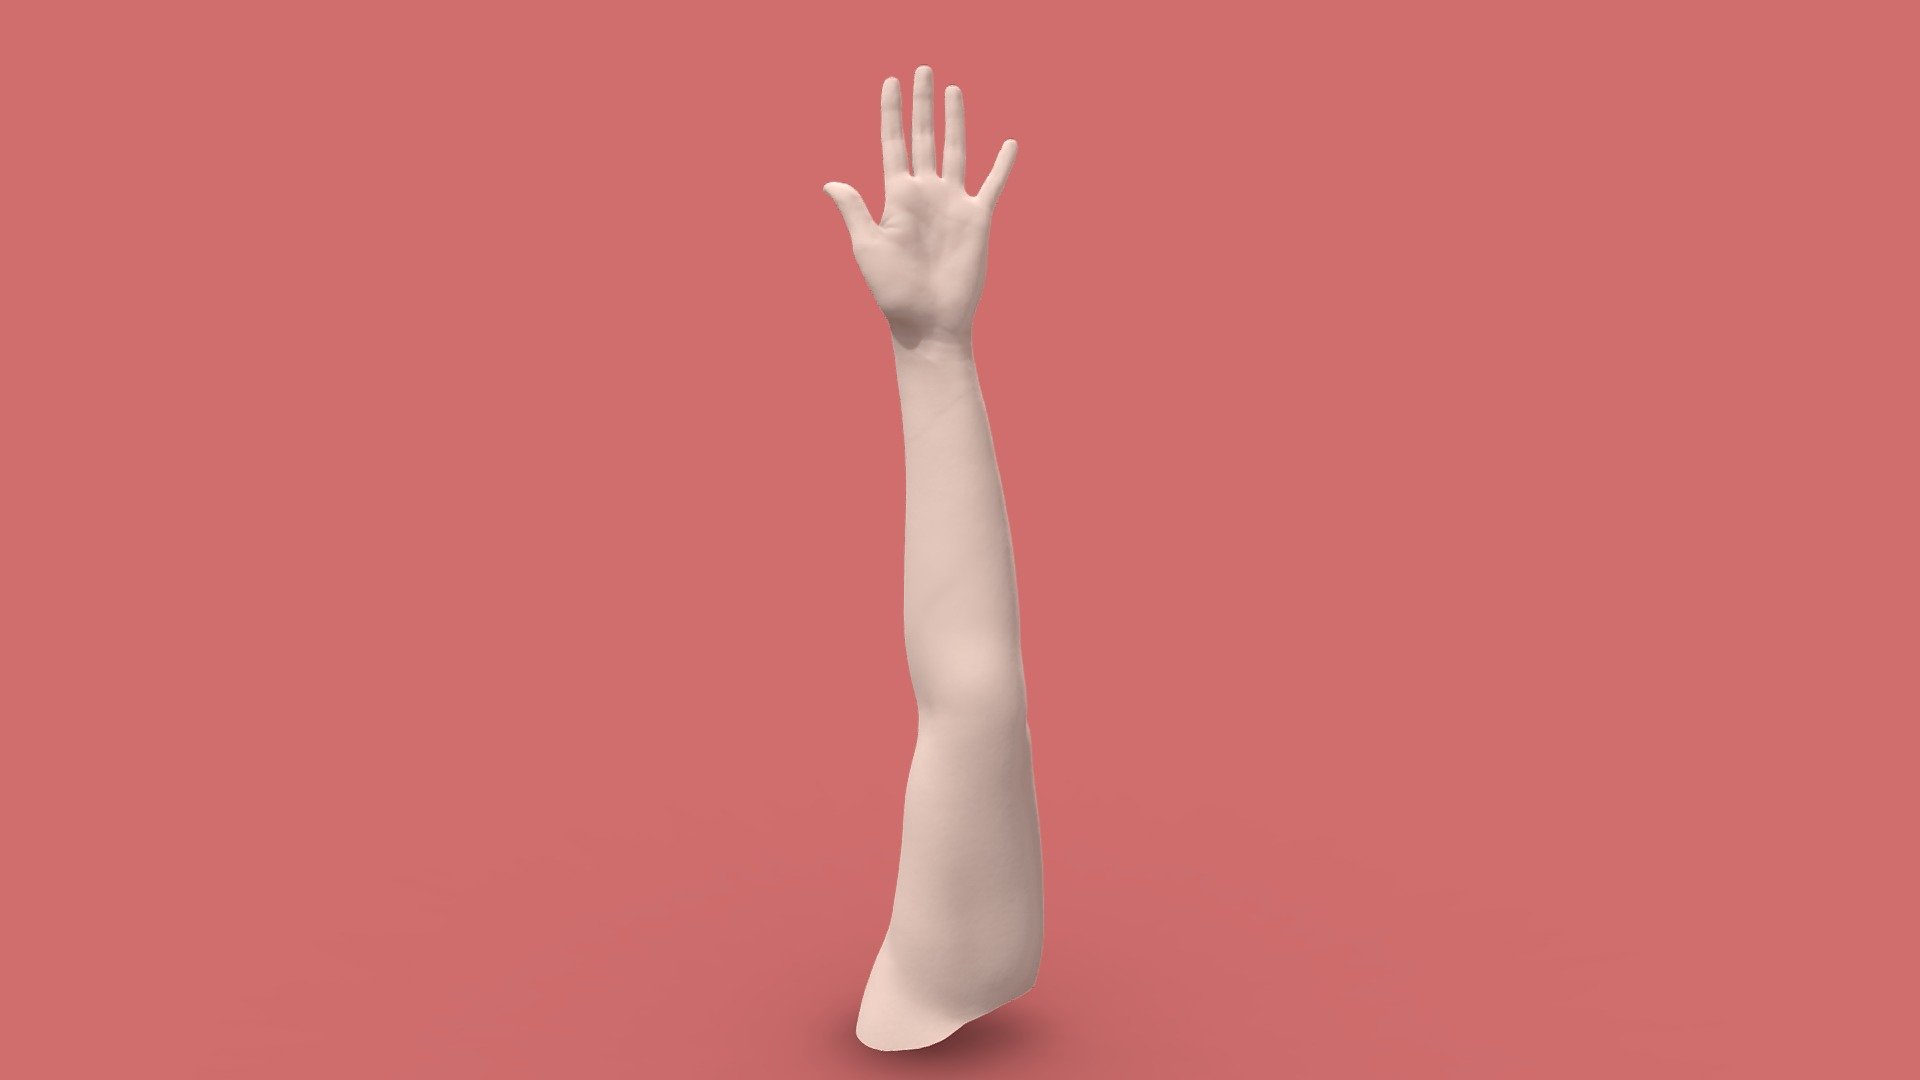 This 3D scanned woman's arm was processed at a resolution of 0.4mm and reduced to 1M polygons from 2.5M. The model has no texture 3d model